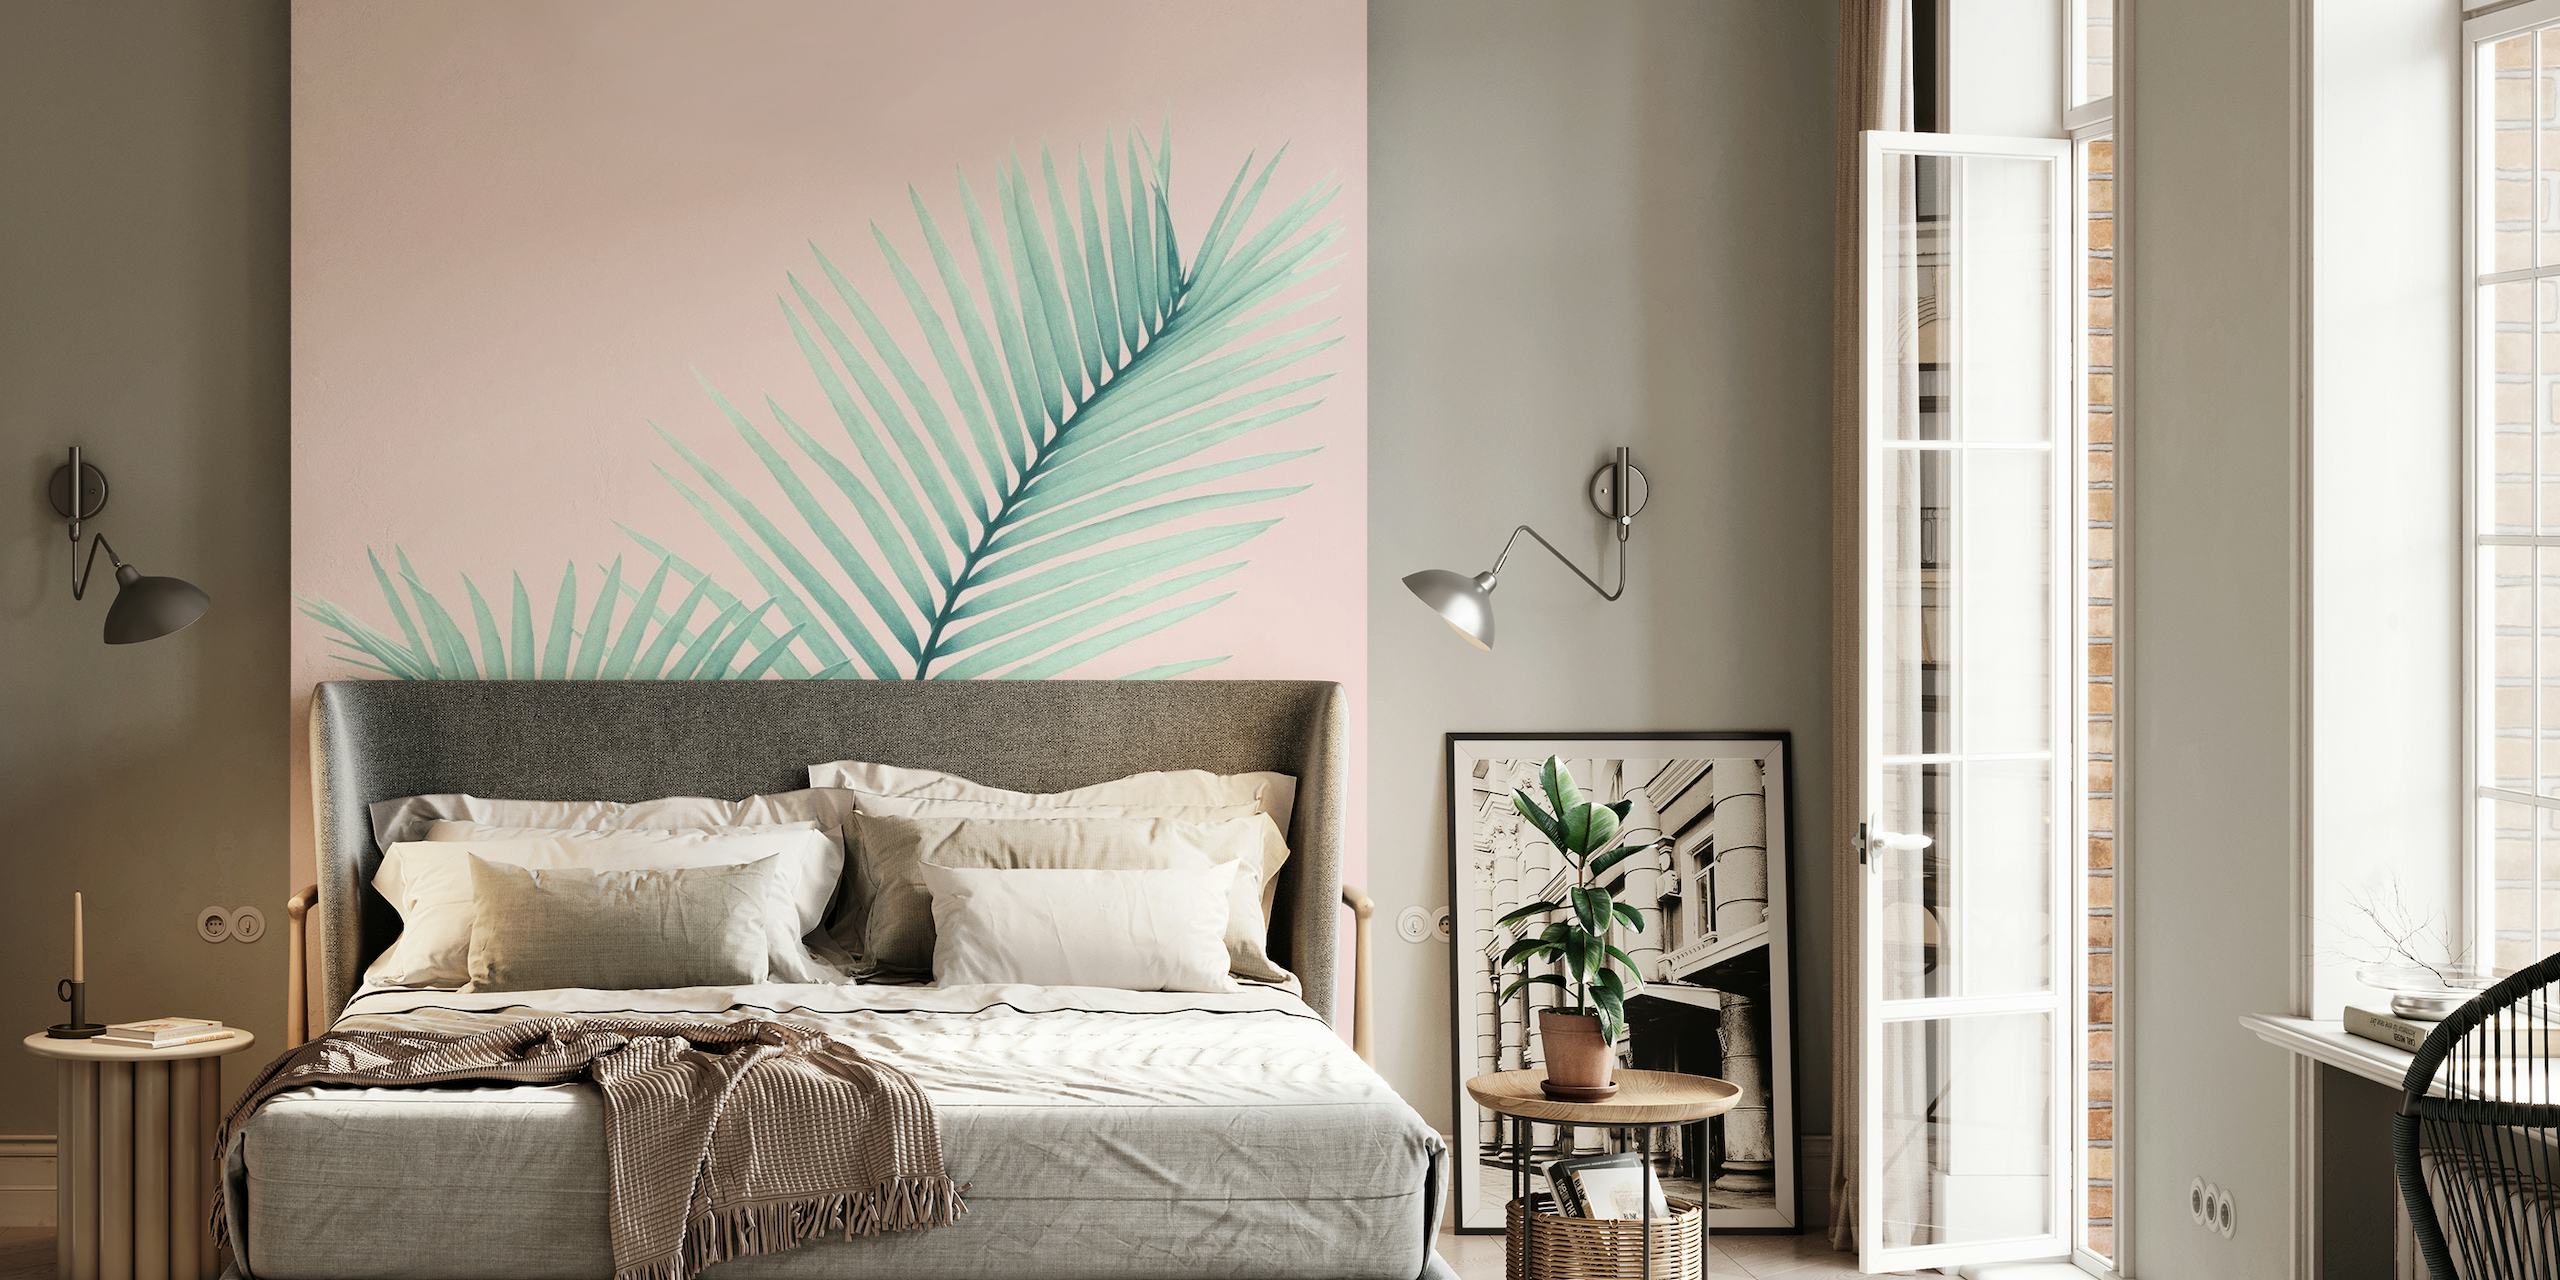 Intertwined Palm Leaves Love 2 papel pintado